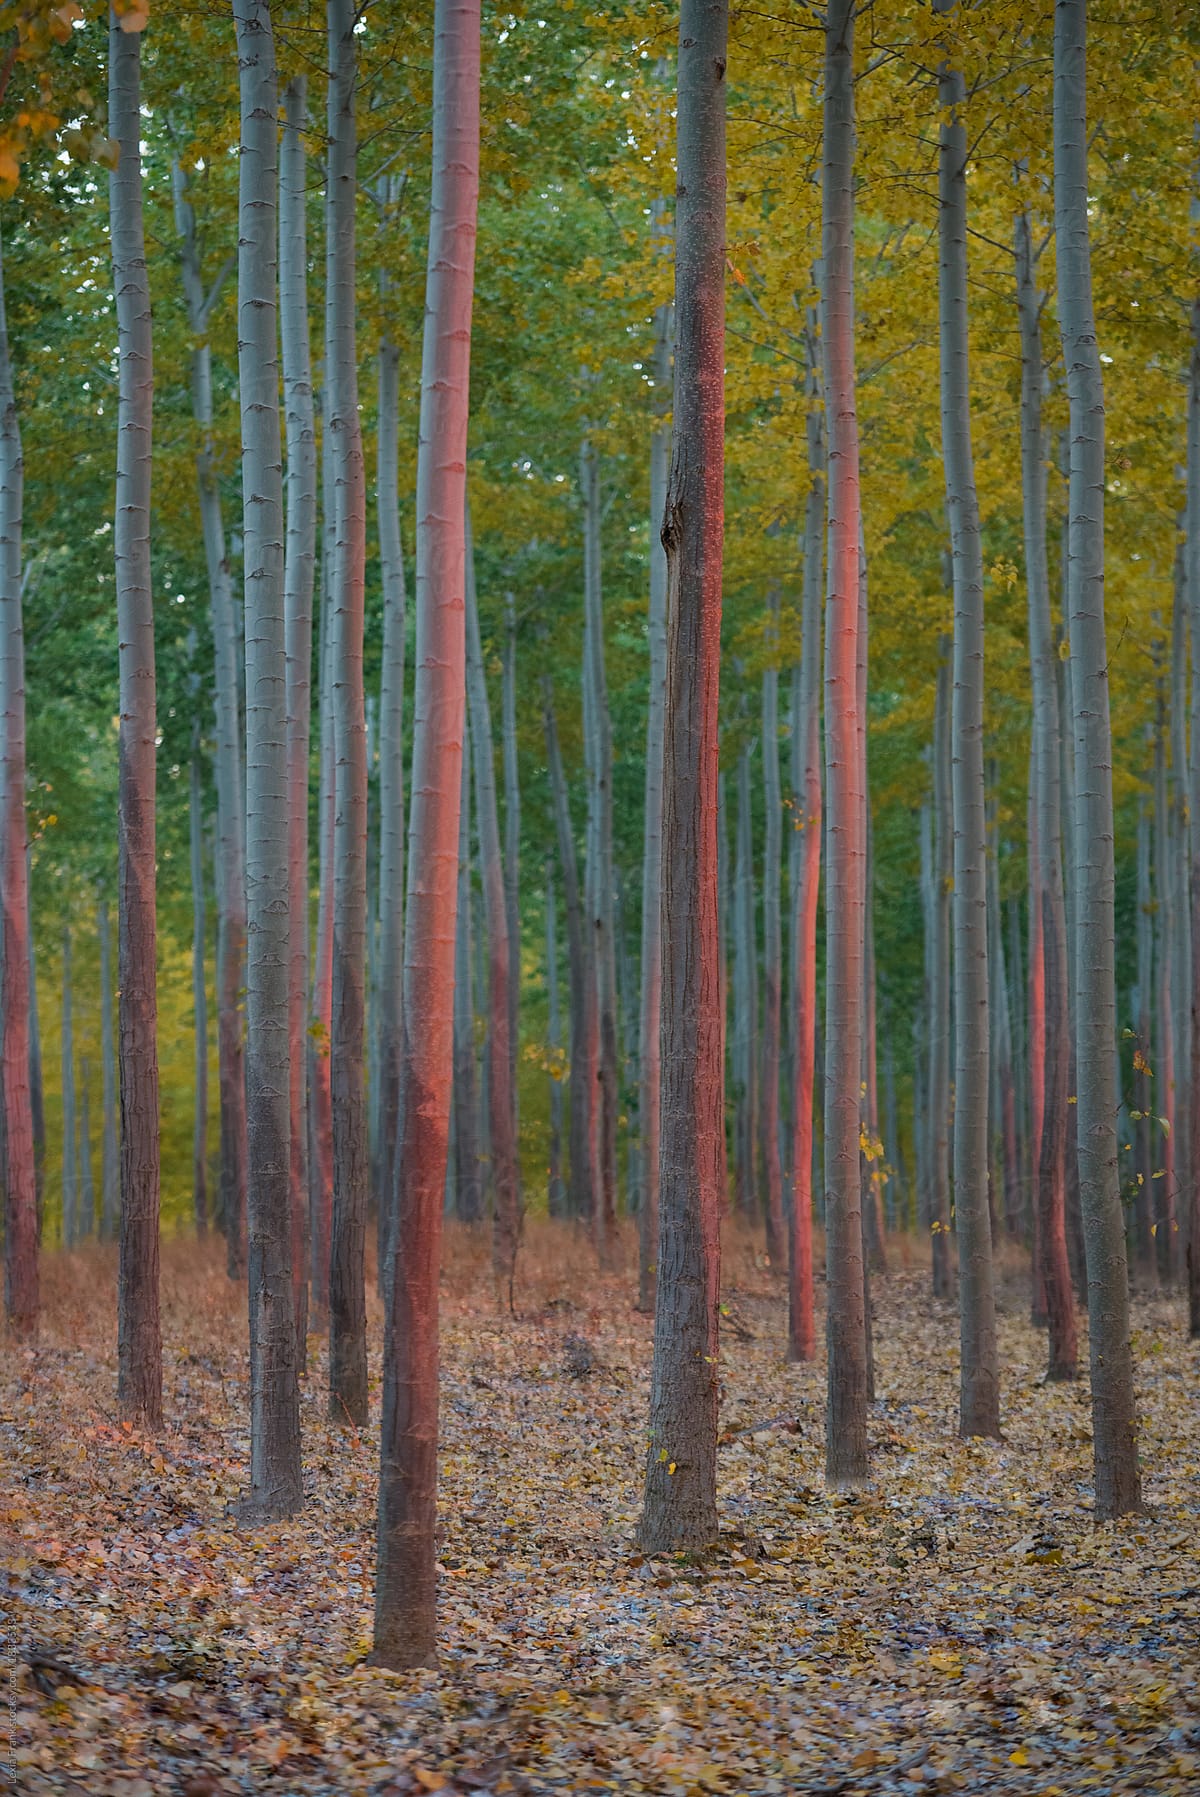 grove of identical poplar trees in the fall with vibrant colors